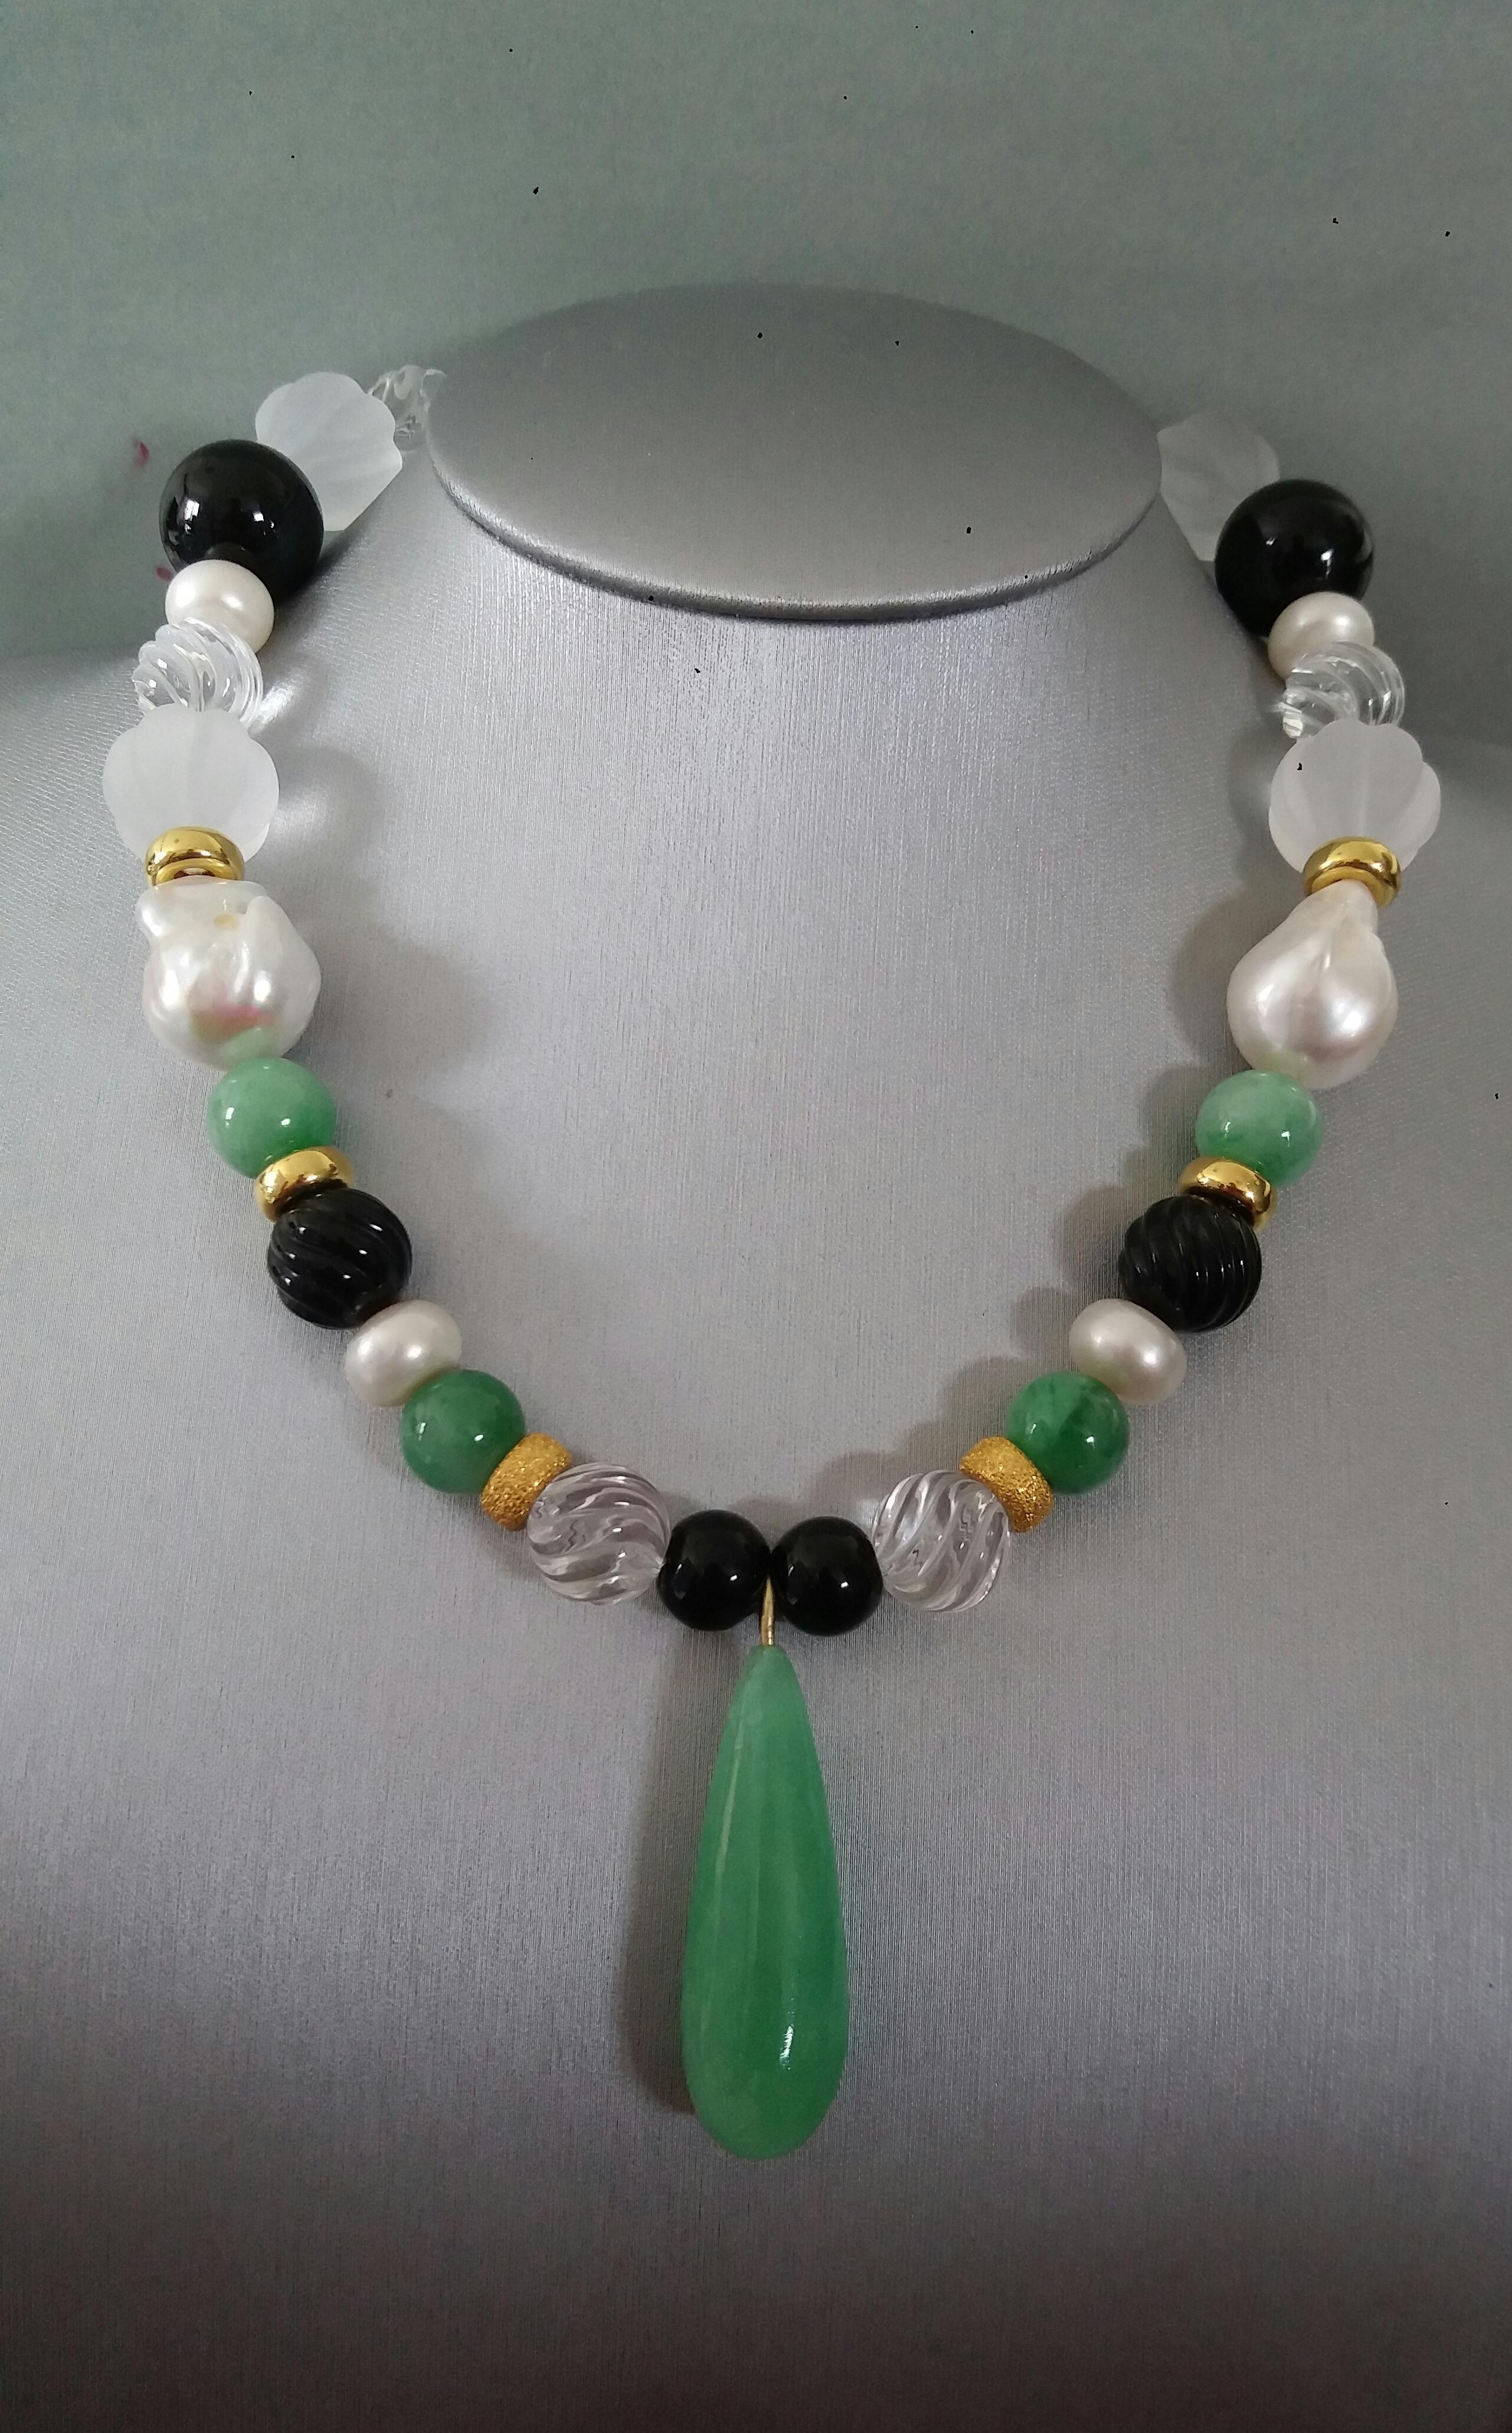 Unique and classic Necklace composed of big size Baroque Pearls, Green Burma Jade 10 mm spheres , Carved Quartz, Black Onyx 16 mm diameter, 14 kt Yellow Gold elements, from which hangs a Jade Round Drop Pendant measuring 13x35 mm.
In 1978 our